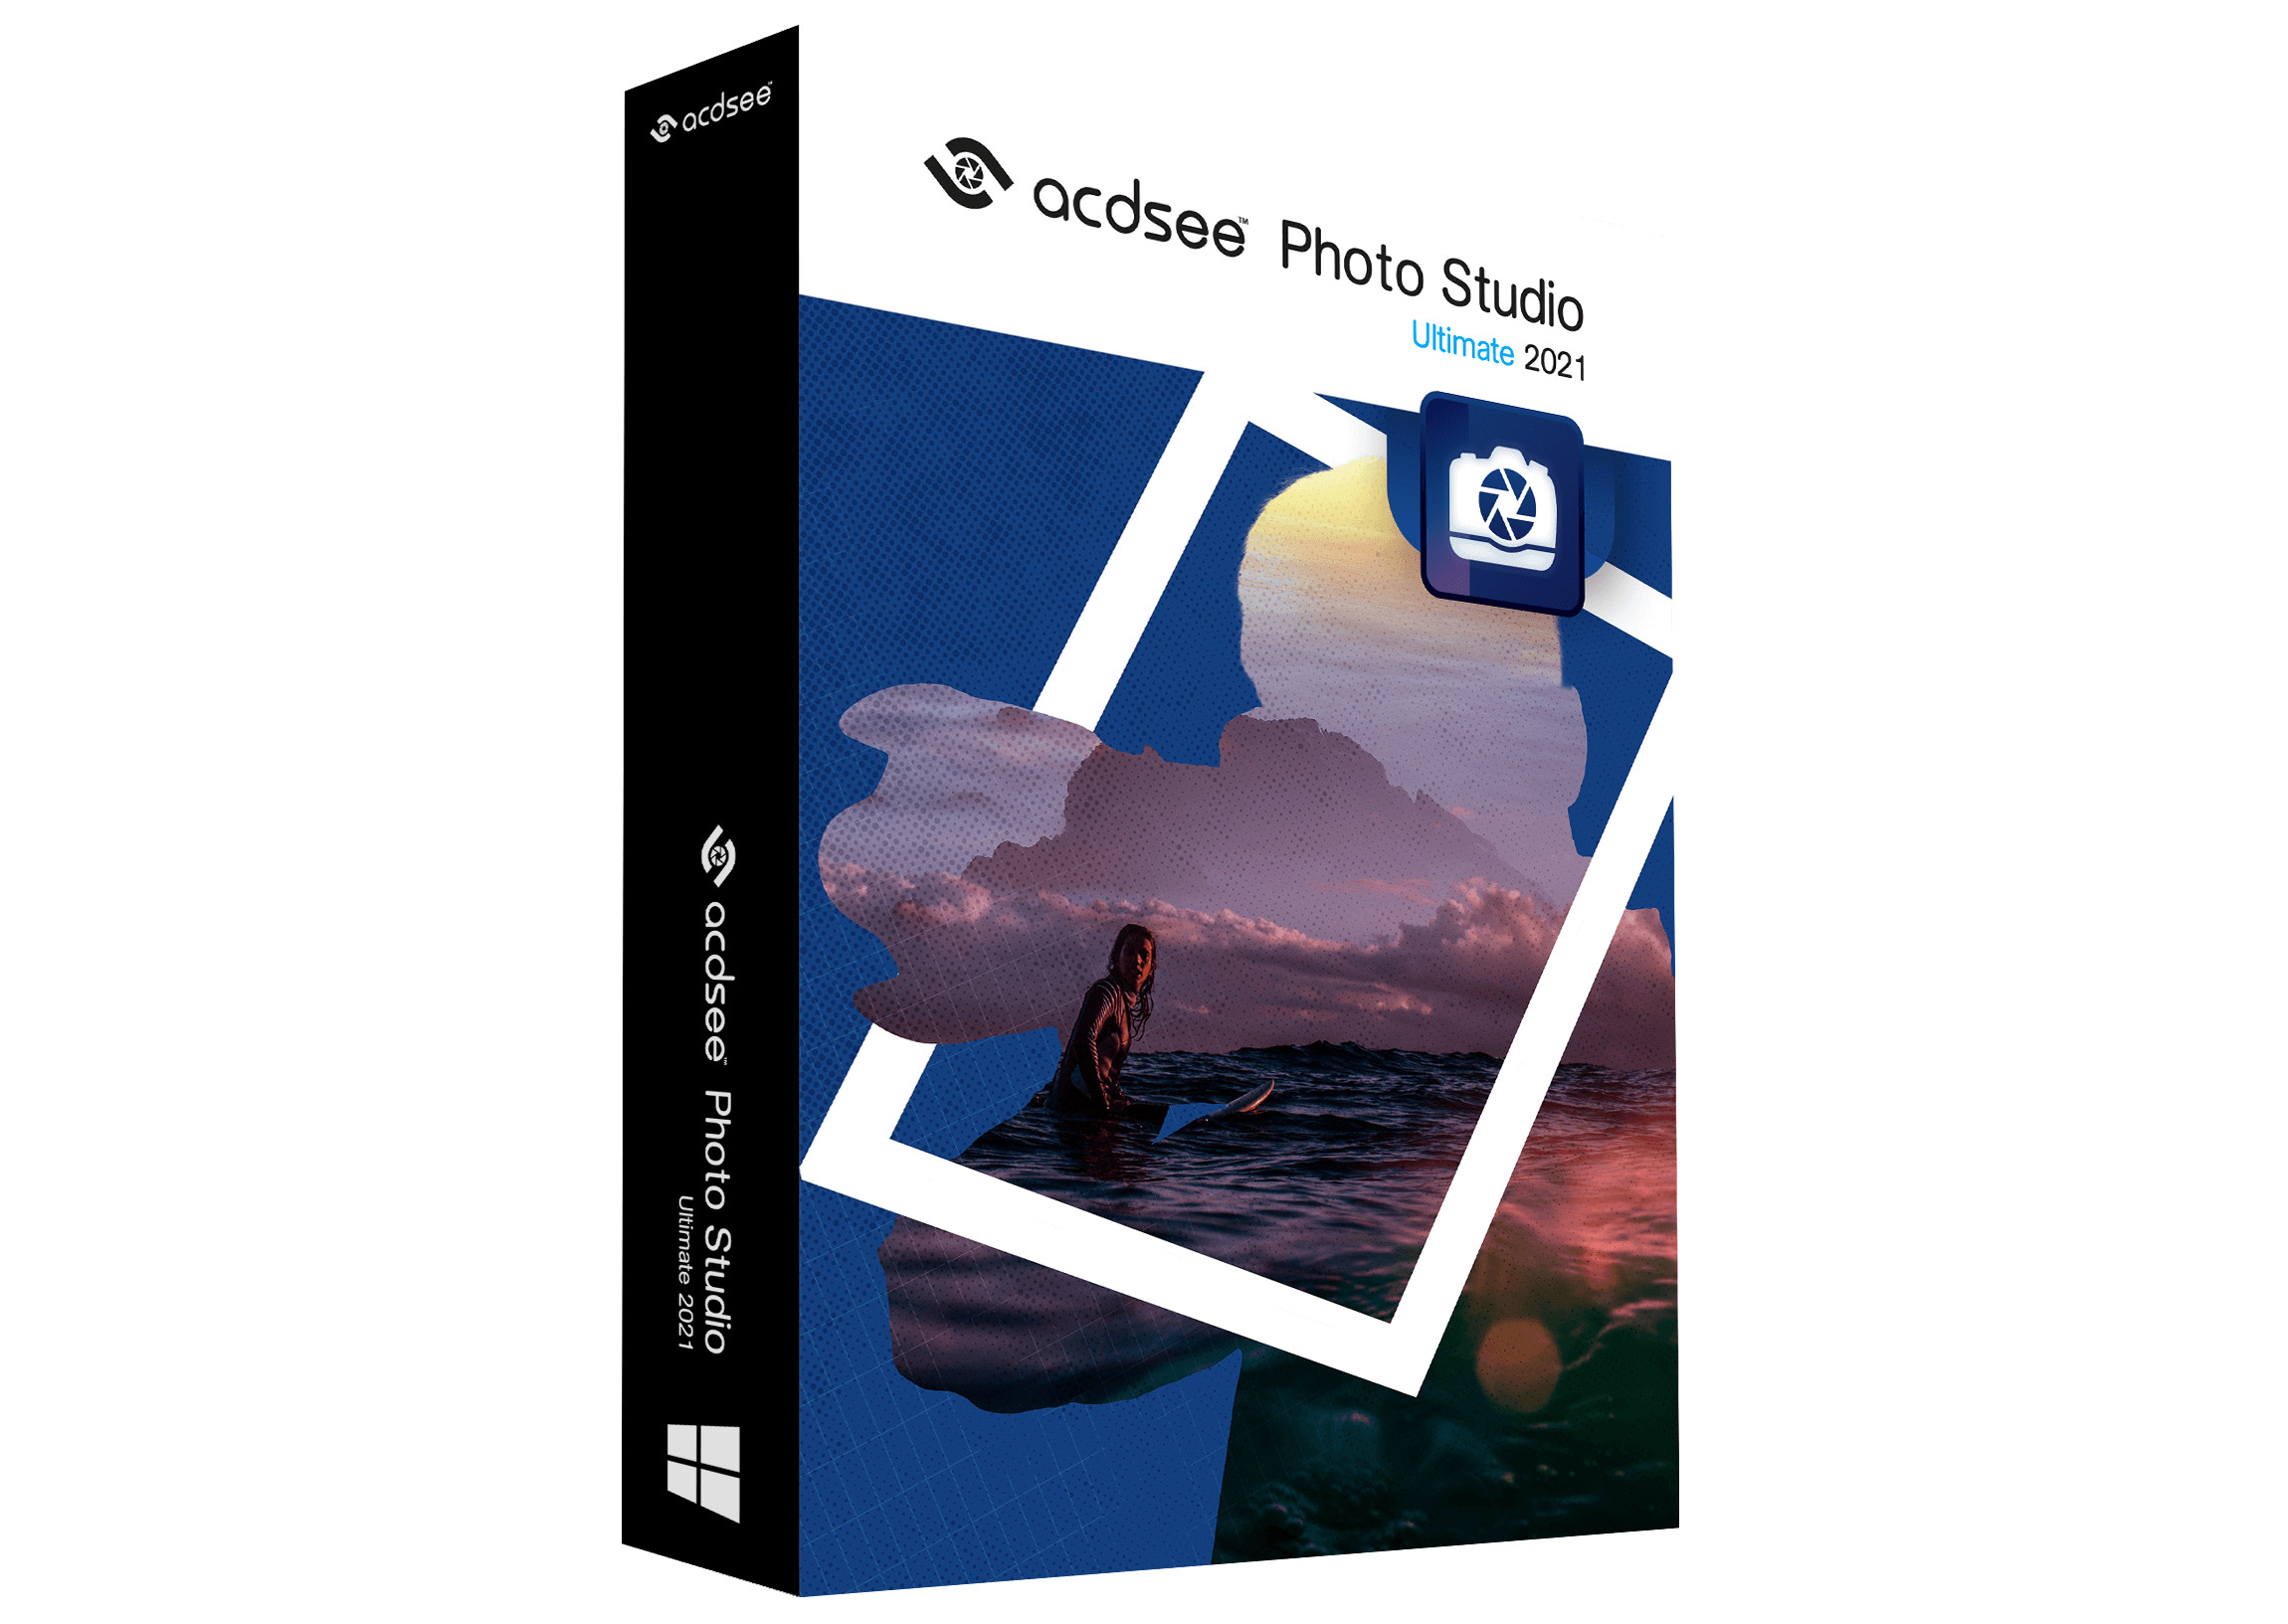 [$ 11.29] ACDSee Photo Studio Ultimate 2021 Key (6 Months / 1 PC)